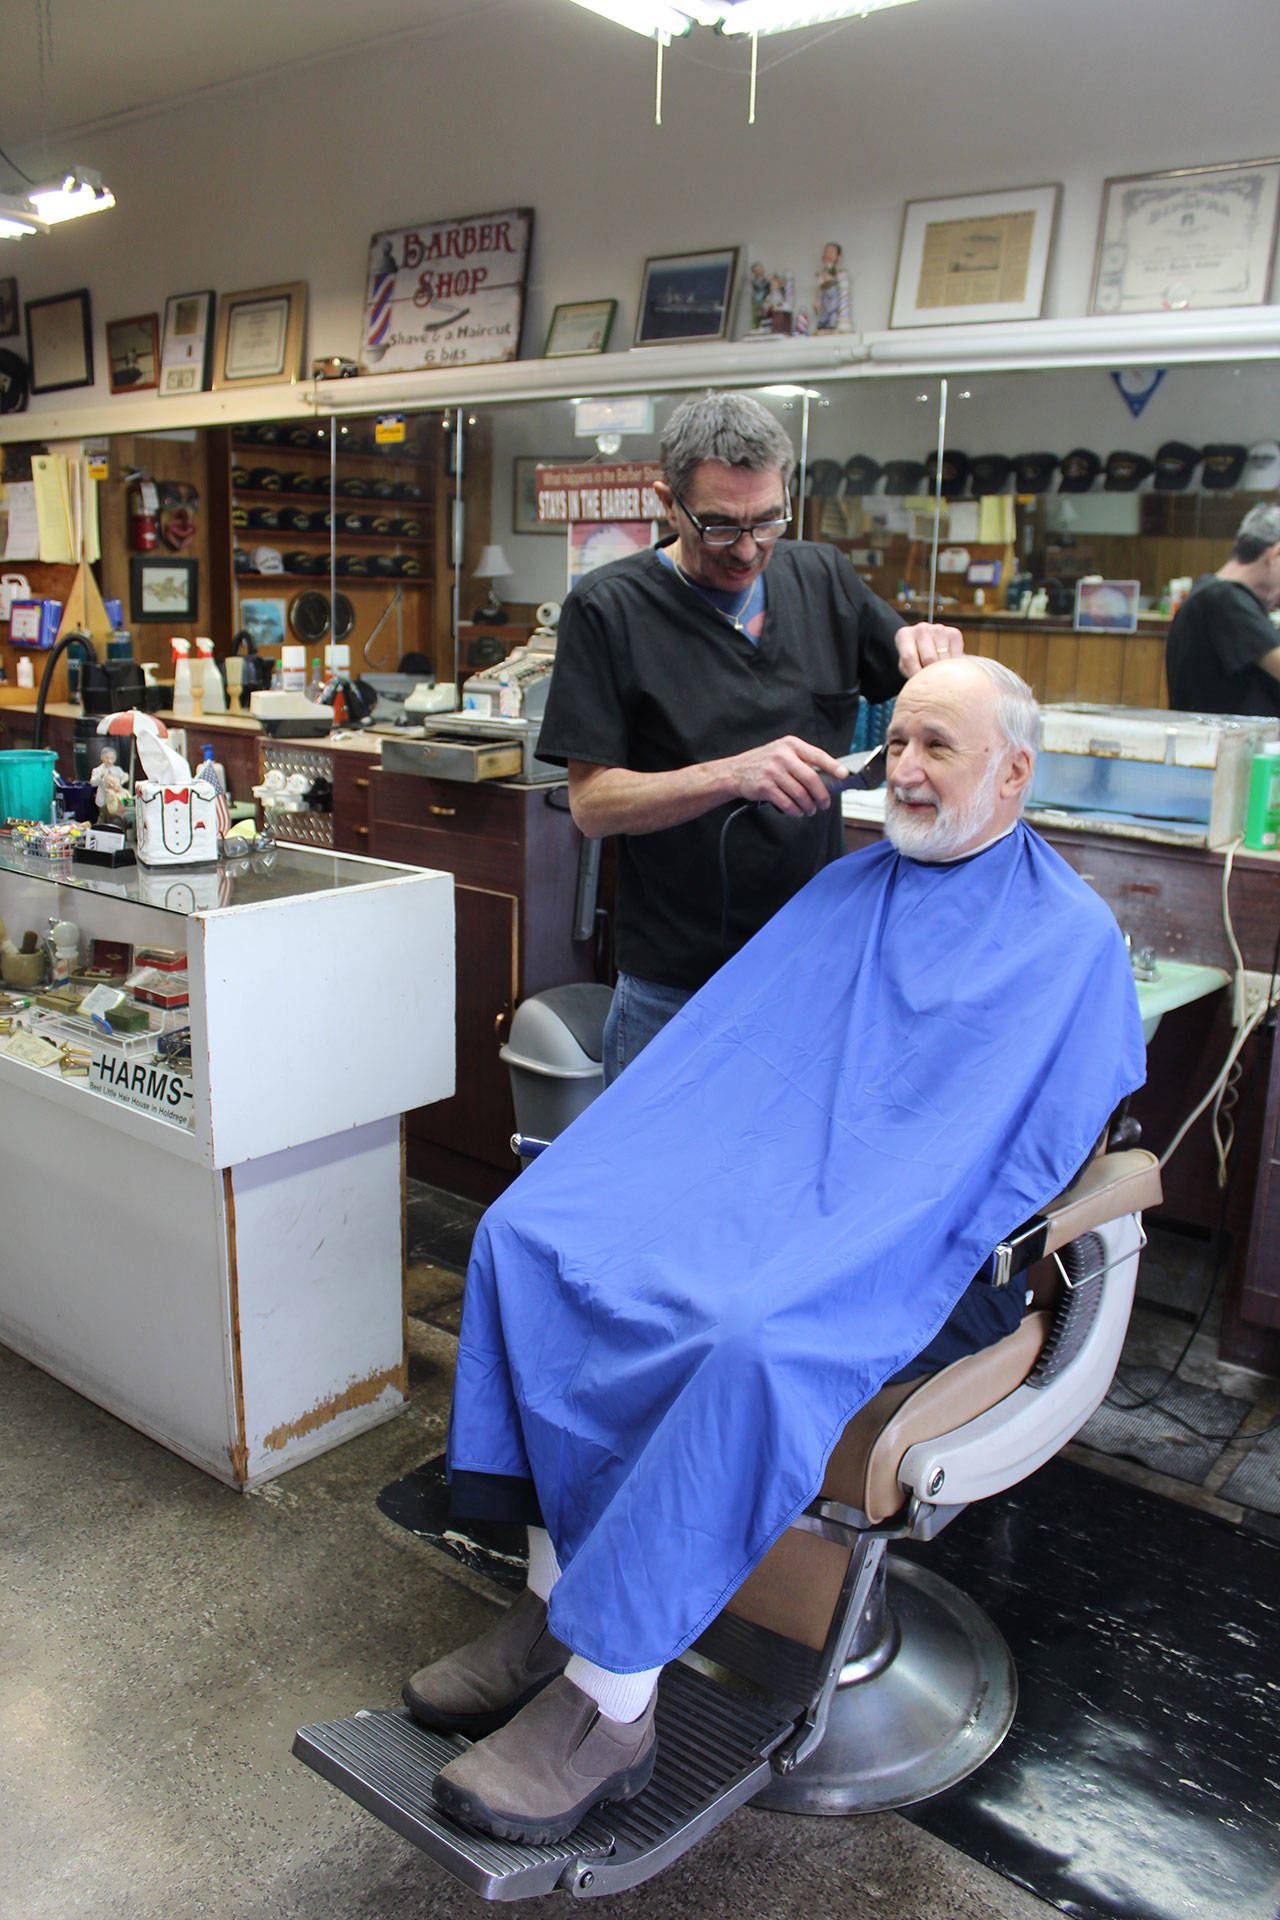 Wanting “a little off the top” customer Bo Chernikoff sits down for a trim at Midway Barber Shop in Oak Harbor. Owner Dave Cleary recently returned after undergoing brain surgery for a cyst that affected his vision. Photo by Patricia Guthrie/Whidbey News-Times